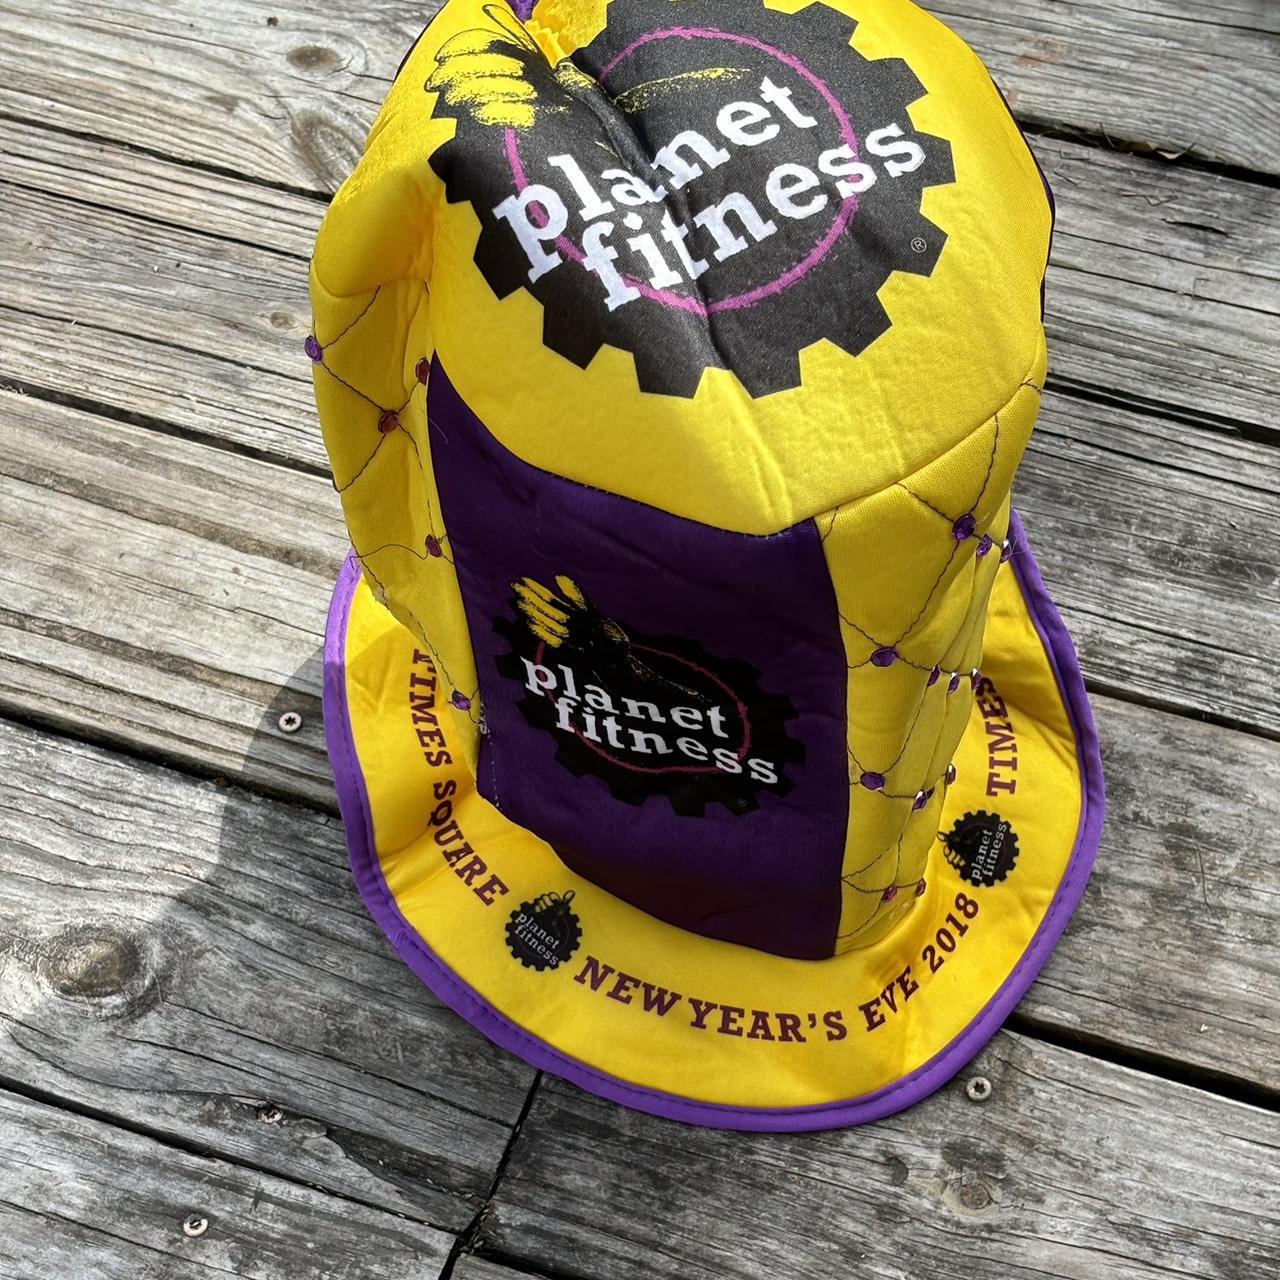 Rare Planet Fitness hat. This purple & yellow hat